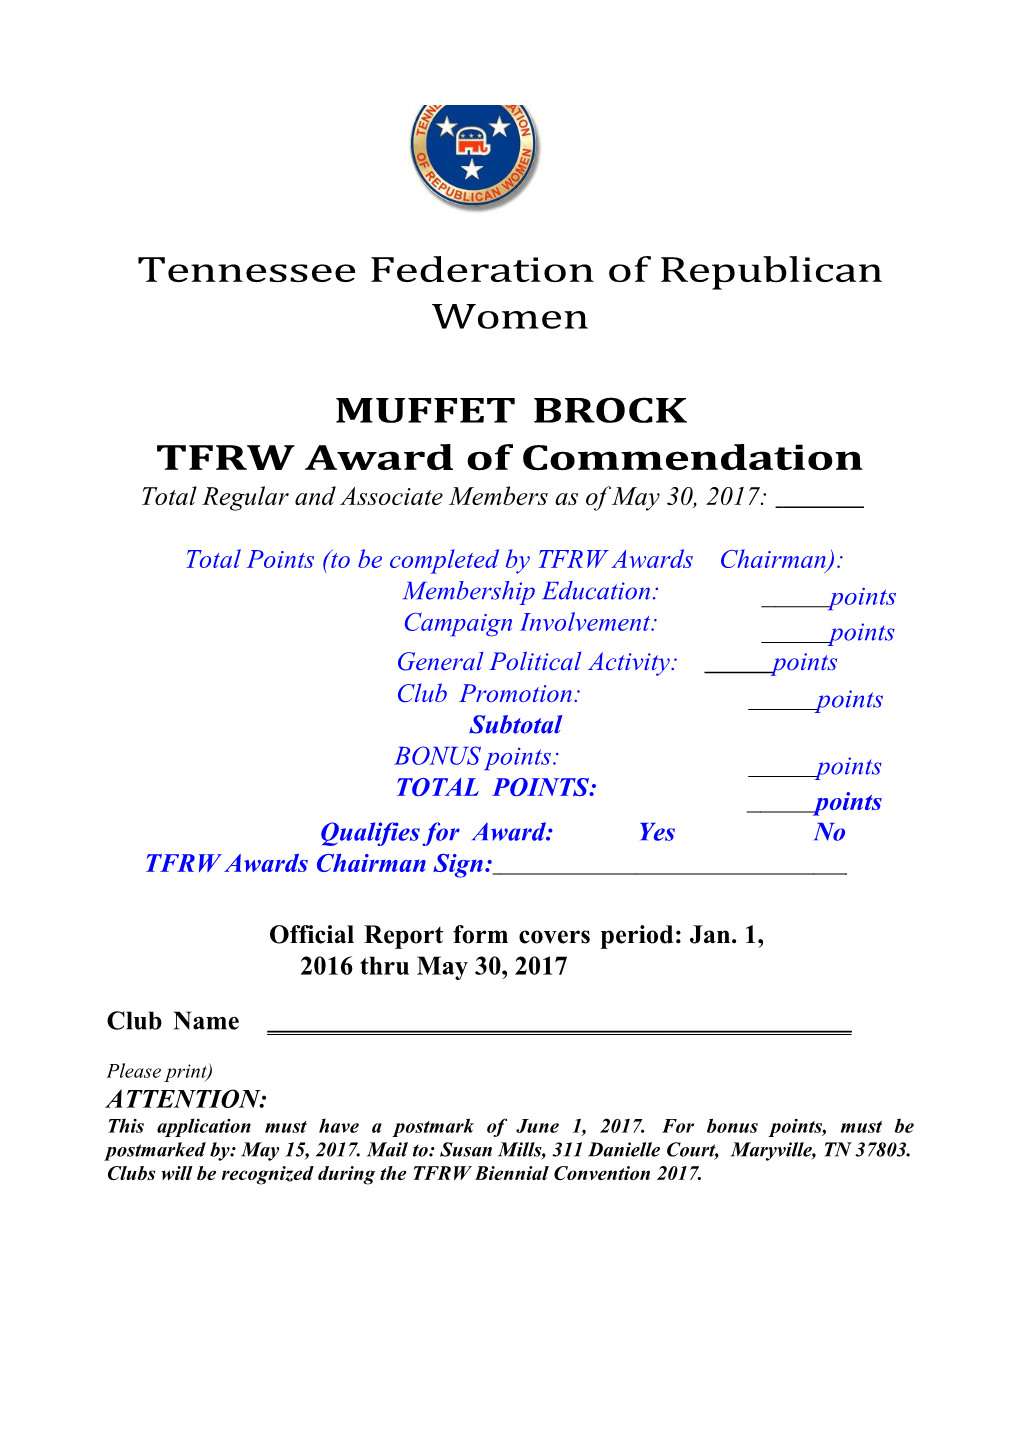 Tennessee Federation of Republican Women